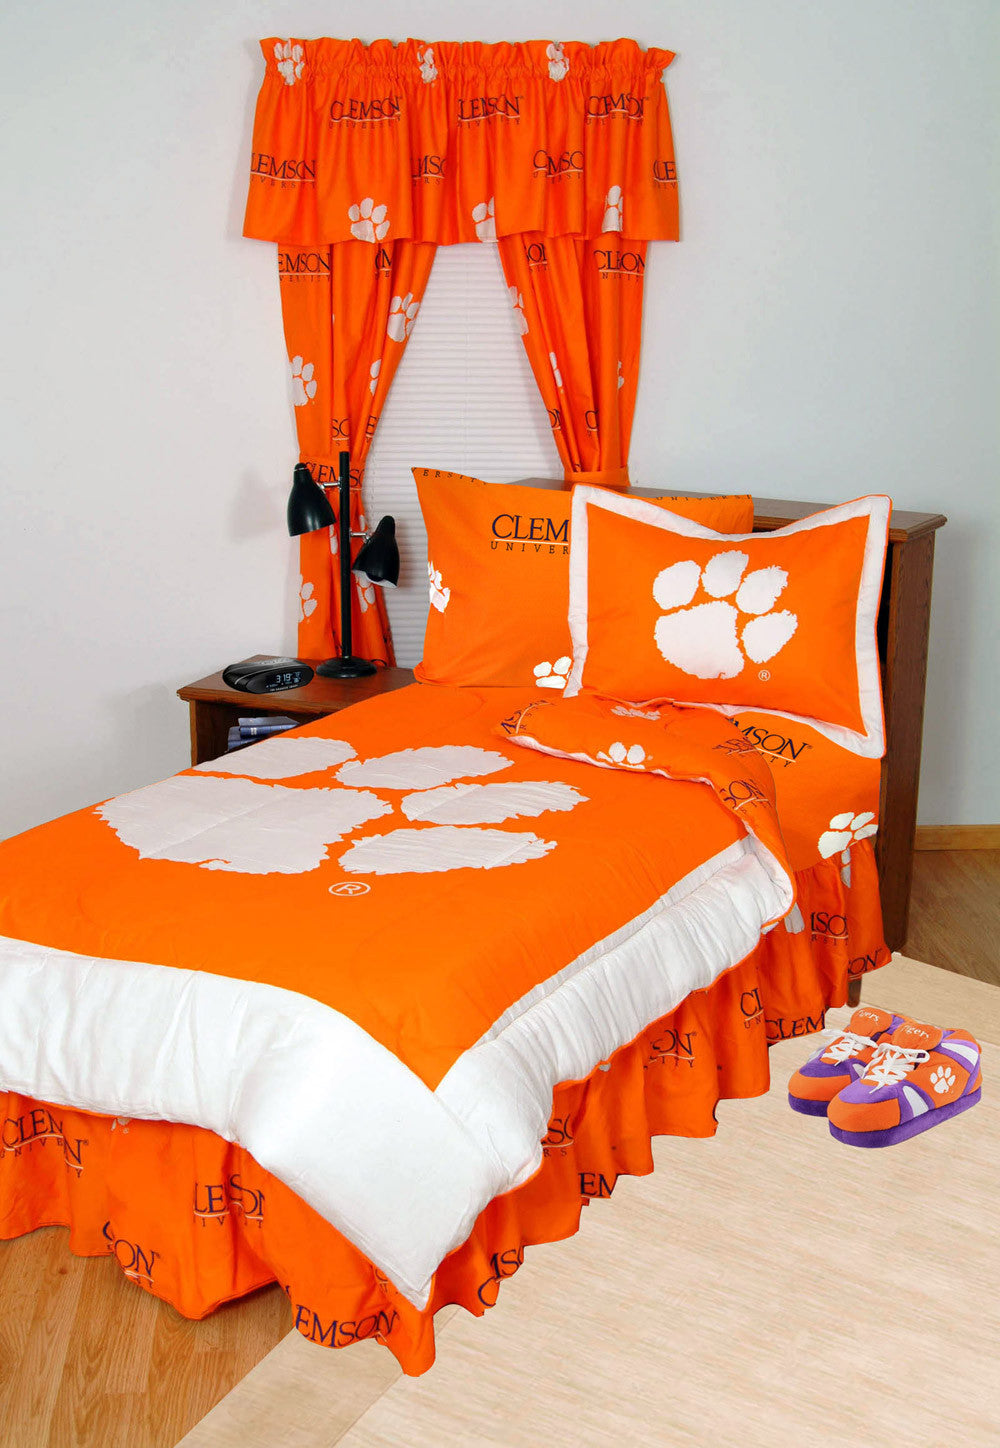 Clemson Bed In A Bag King - With Team Colored Sheets - Clebbkg By College Covers